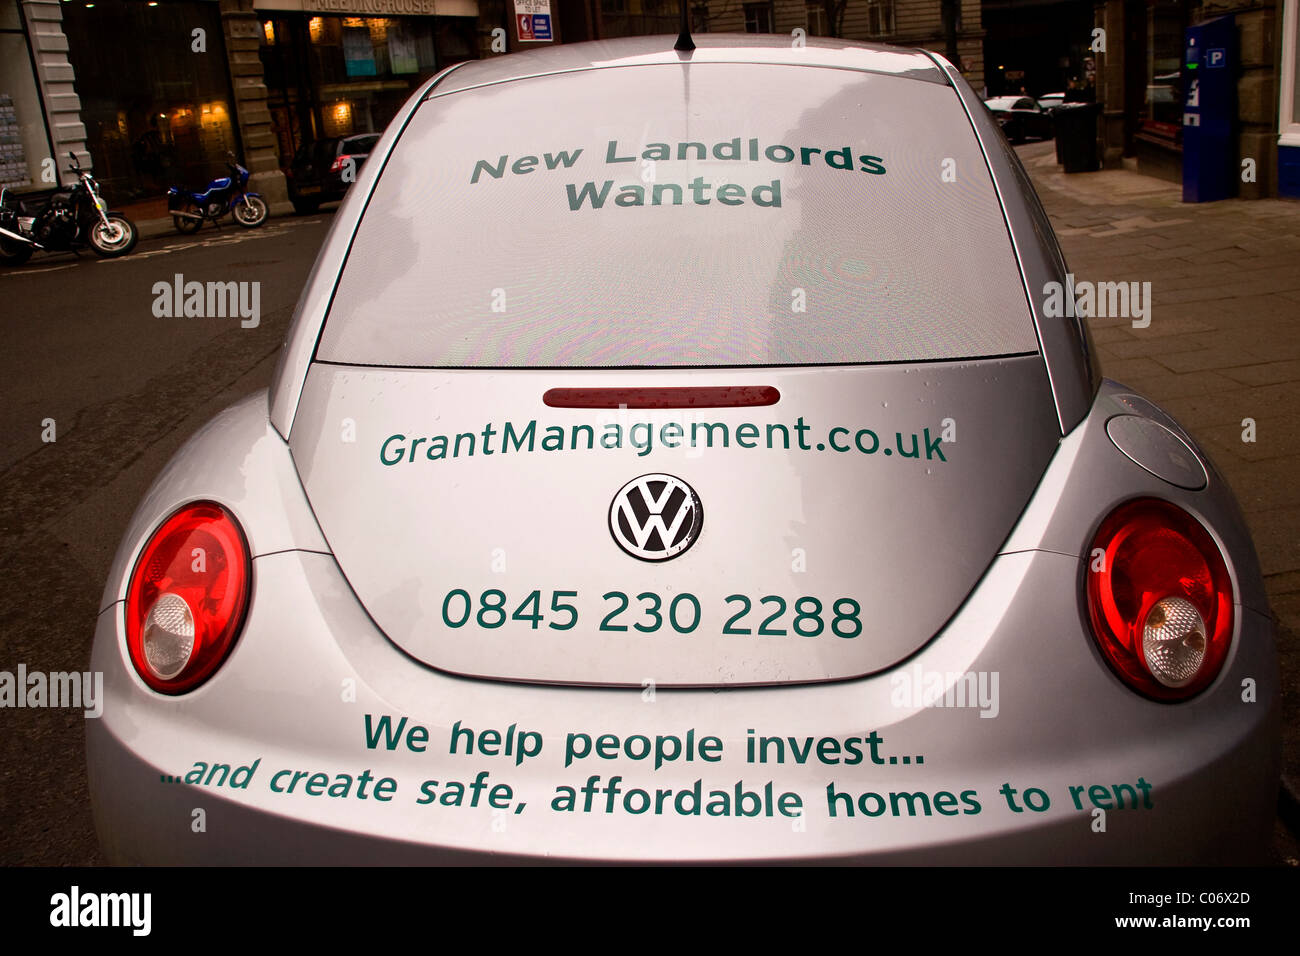 Rear view of VW Beetle advertising jobs for new landlords wanted to promote affordable housing to rent in Dundee,UK Stock Photo